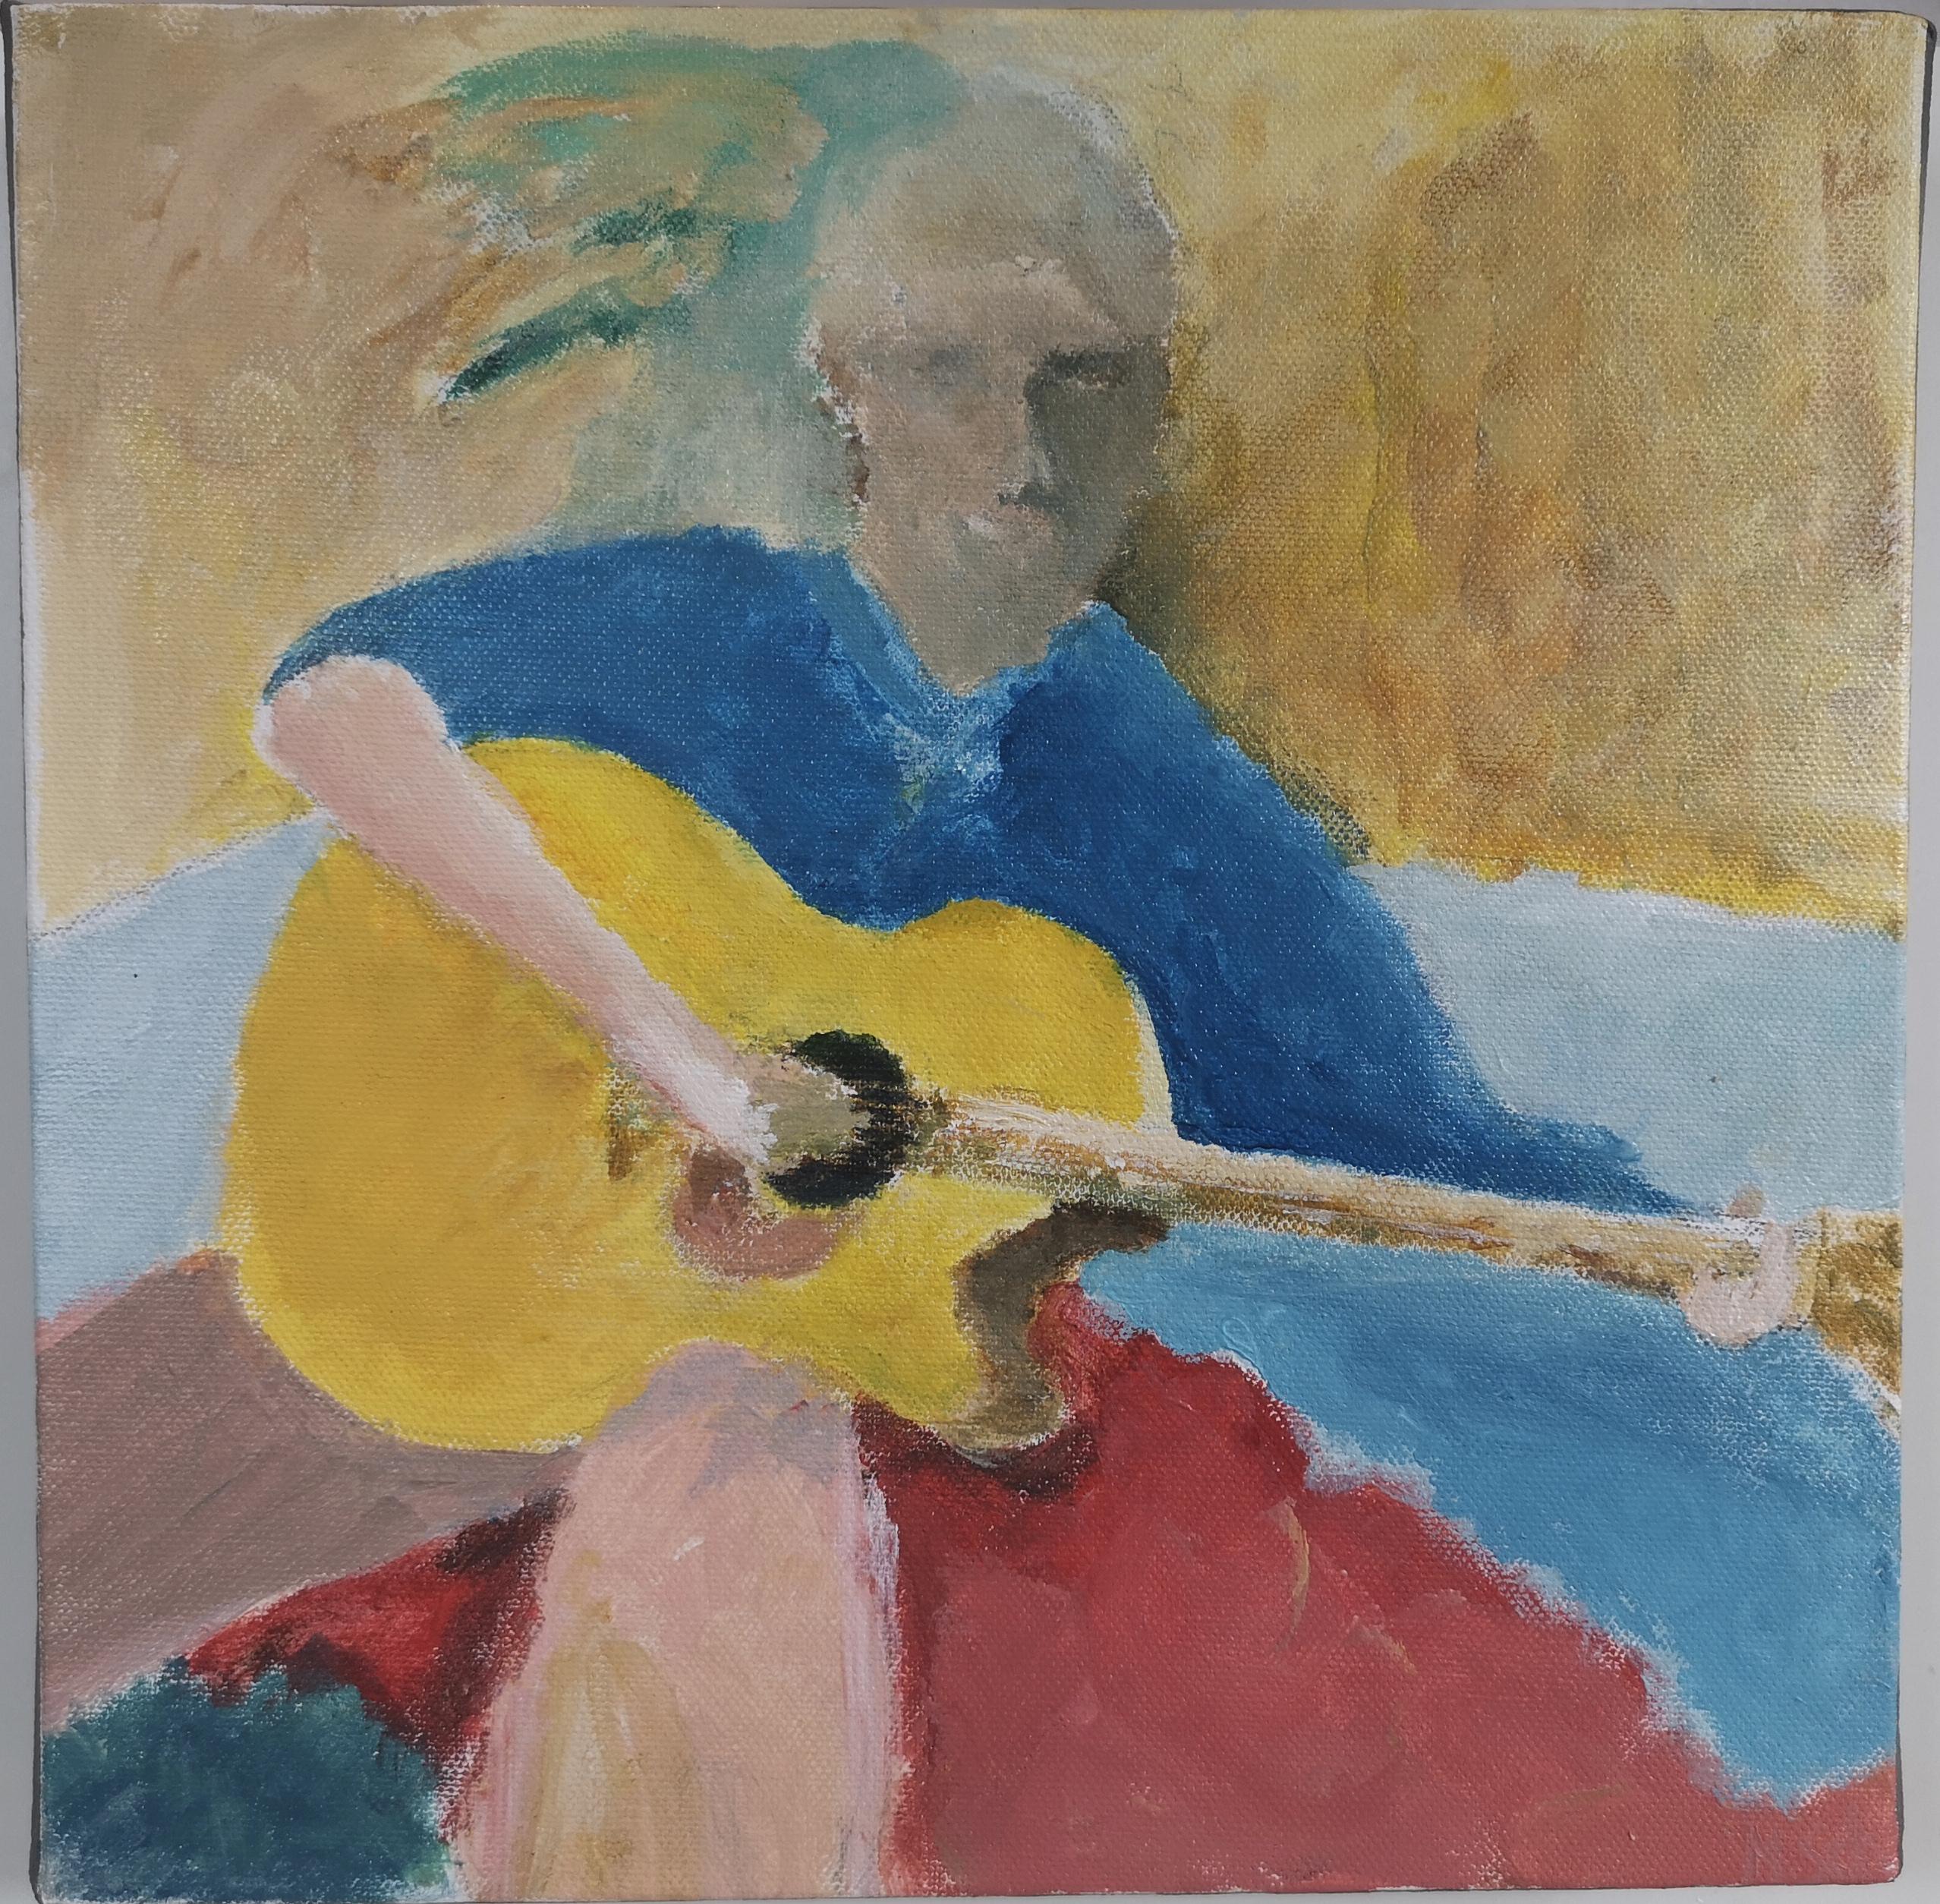 Seated boy with guitar